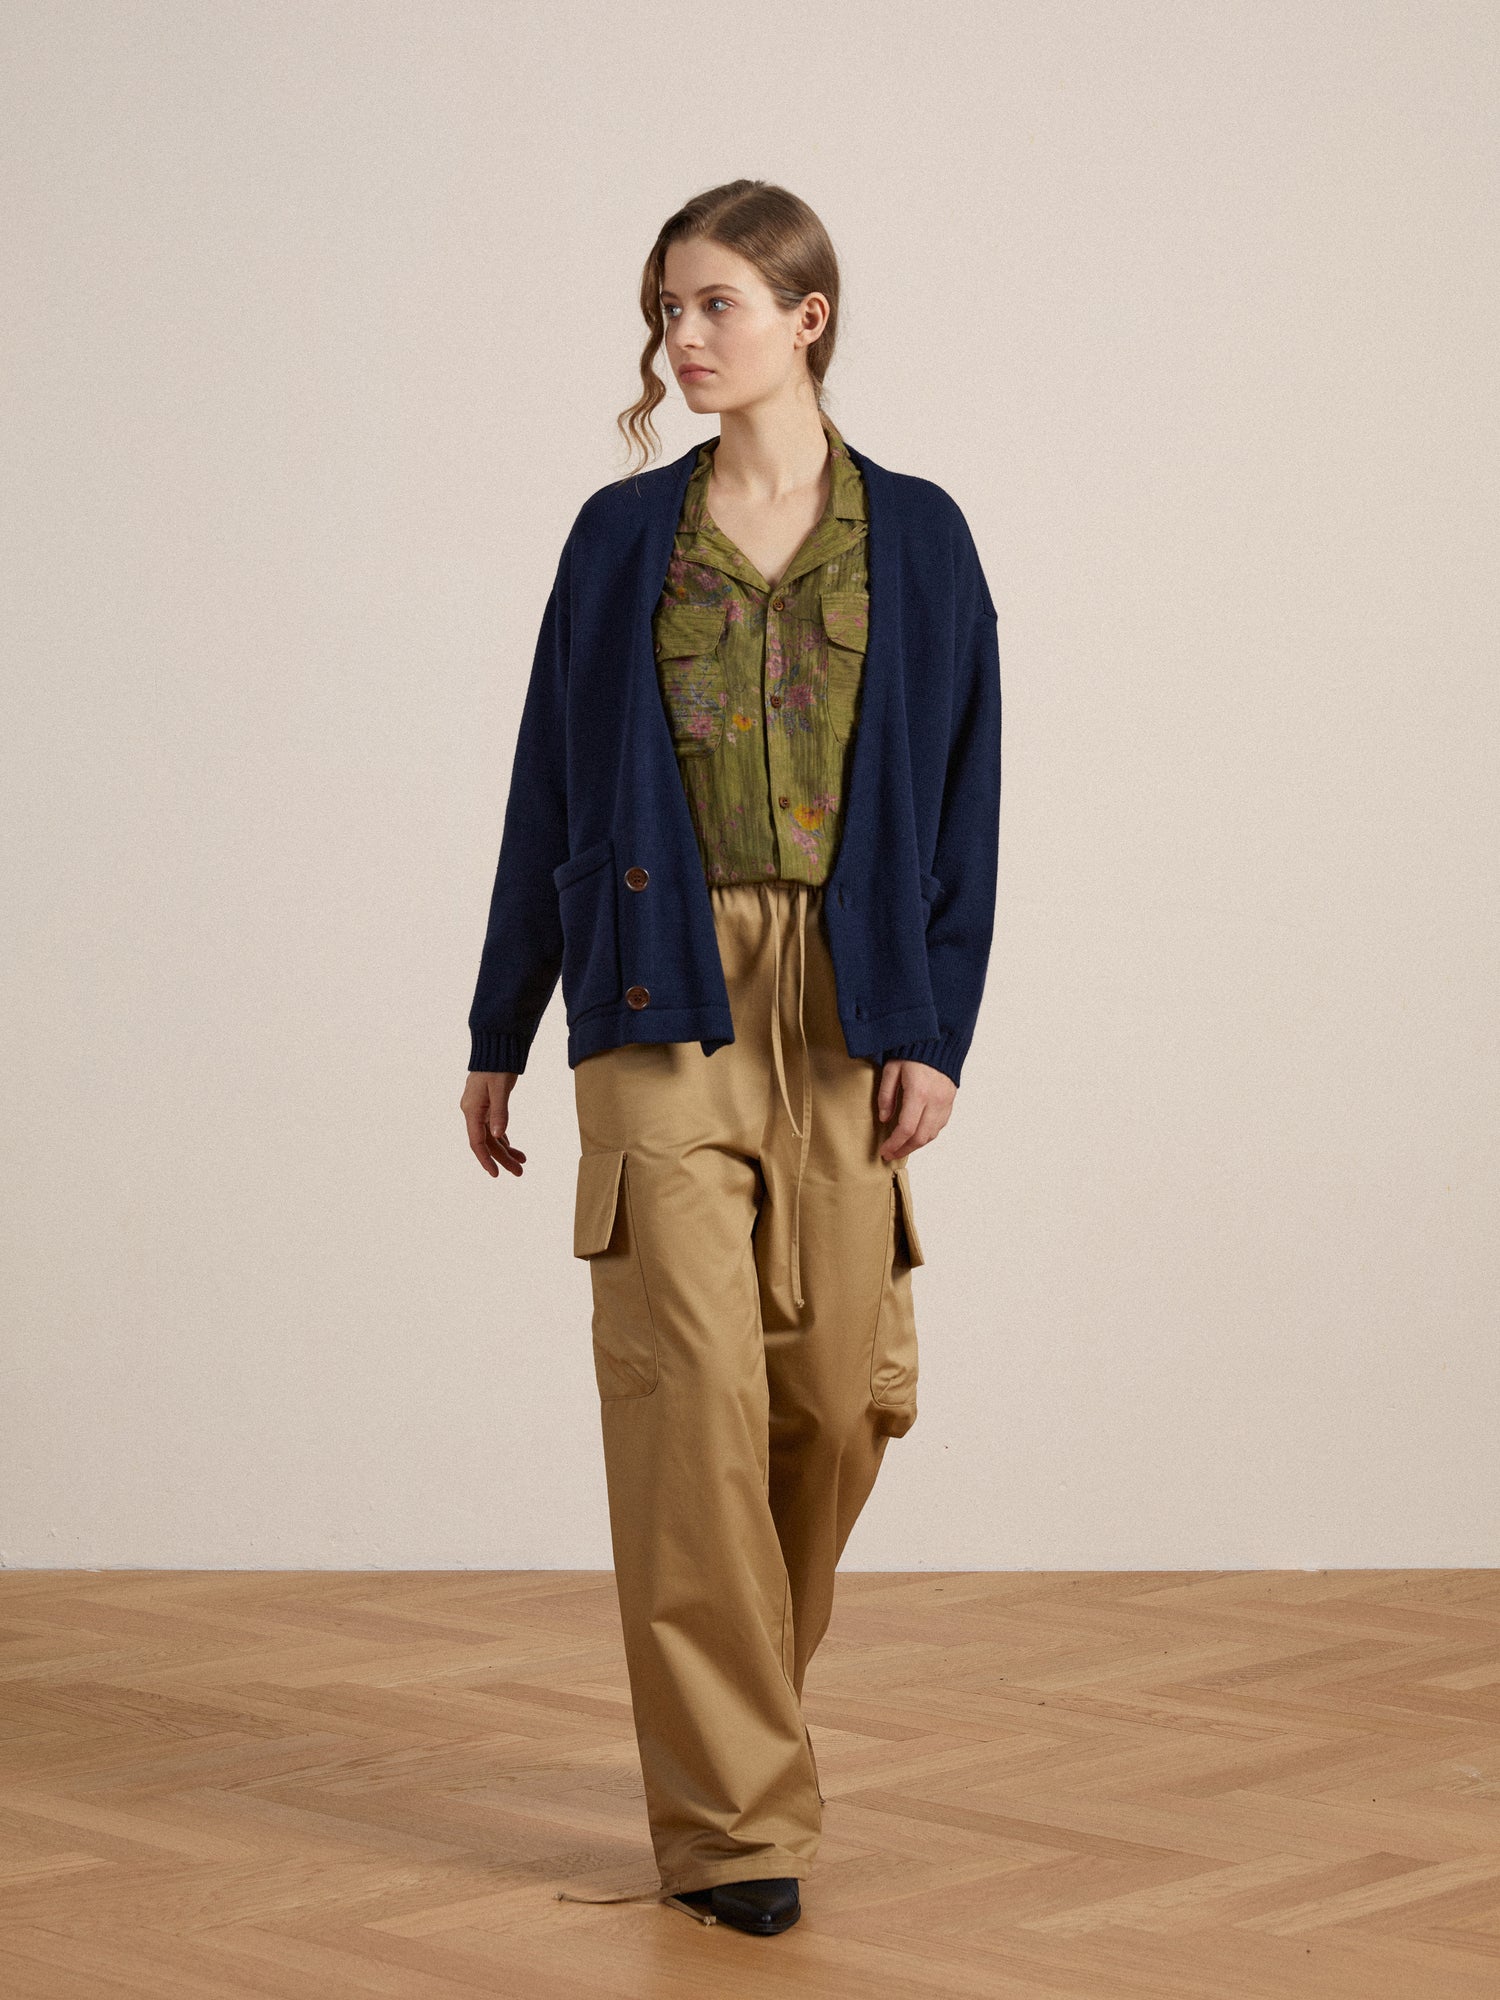 A woman in Found Floral Moss LS Camp Shirt and a navy cardigan.